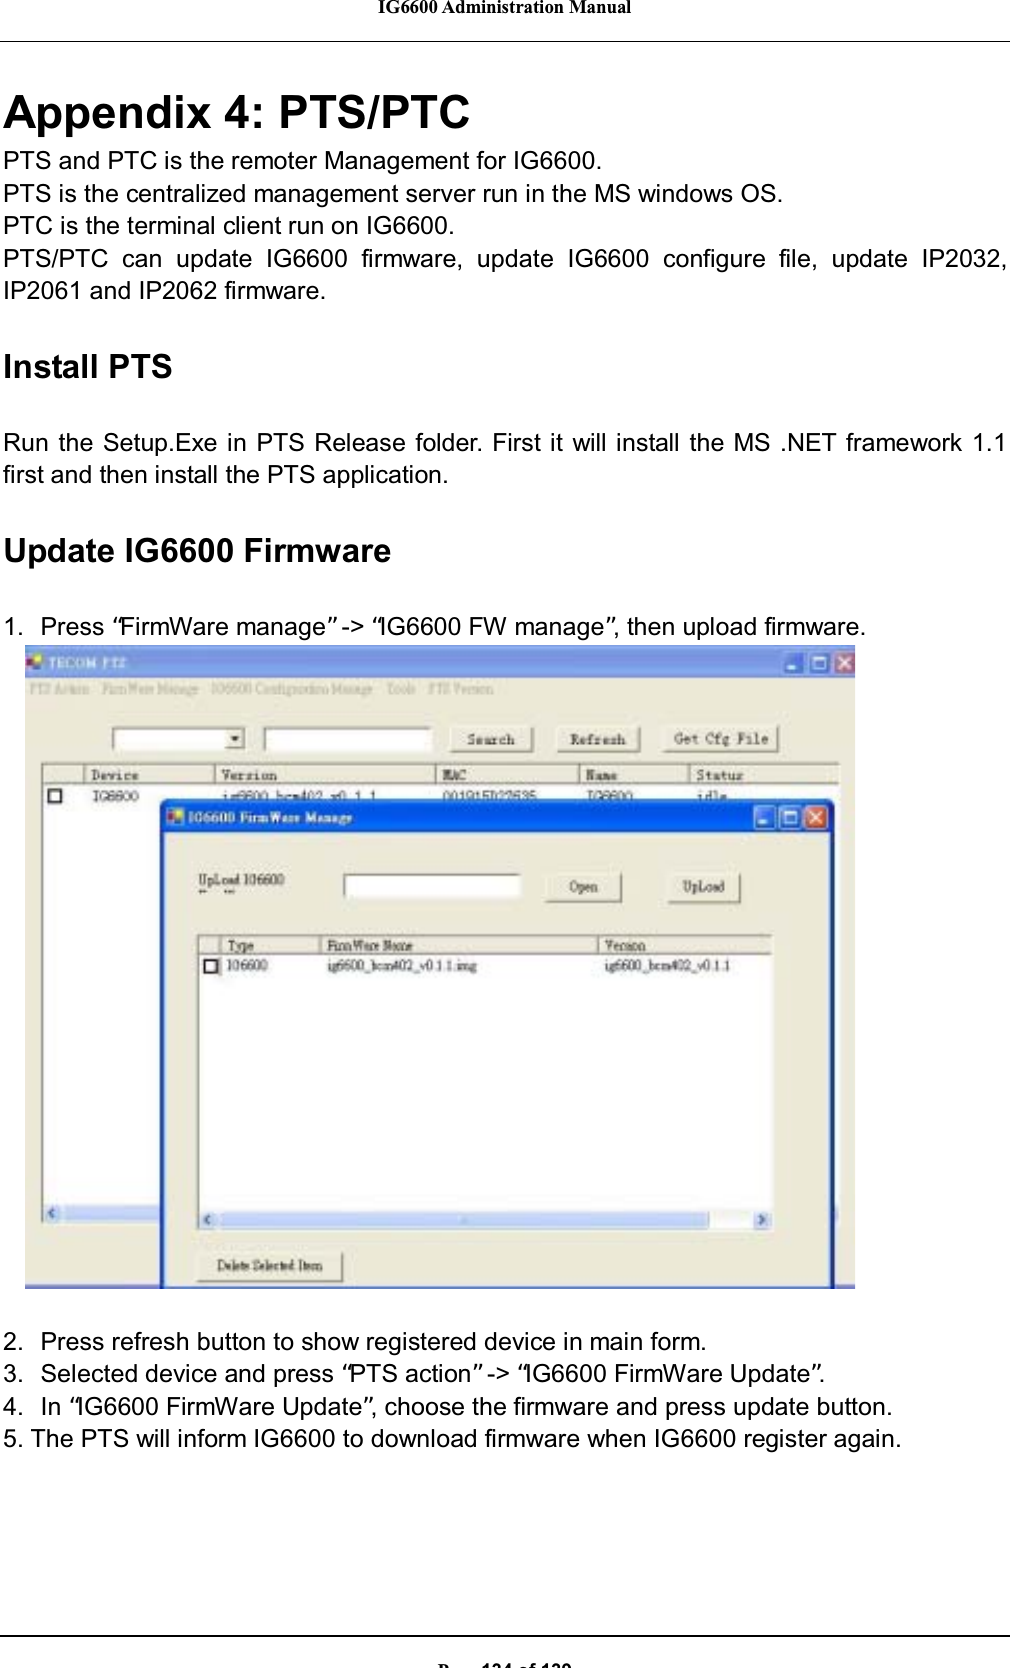 IG6600 Administration ManualP134of139Appendix 4: PTS/PTCPTS and PTC is the remoter Management for IG6600.PTS is the centralized management server run in the MS windows OS.PTC is the terminal client run on IG6600.PTS/PTC can update IG6600 firmware, update IG6600 configure file, update IP2032,IP2061 and IP2062 firmware.Install PTSRun the Setup.Exe in PTS Release folder. First it will install the MS .NET framework 1.1first and then install the PTS application.Update IG6600 Firmware1. Press “FirmWare manage”-&gt; “IG6600 FW manage”, then upload firmware.2. Press refresh button to show registered device in main form.3. Selected device and press “PTS action”-&gt; “IG6600 FirmWare Update”.4. In “IG6600 FirmWare Update”, choose the firmware and press update button.5. The PTS will inform IG6600 to download firmware when IG6600 register again.